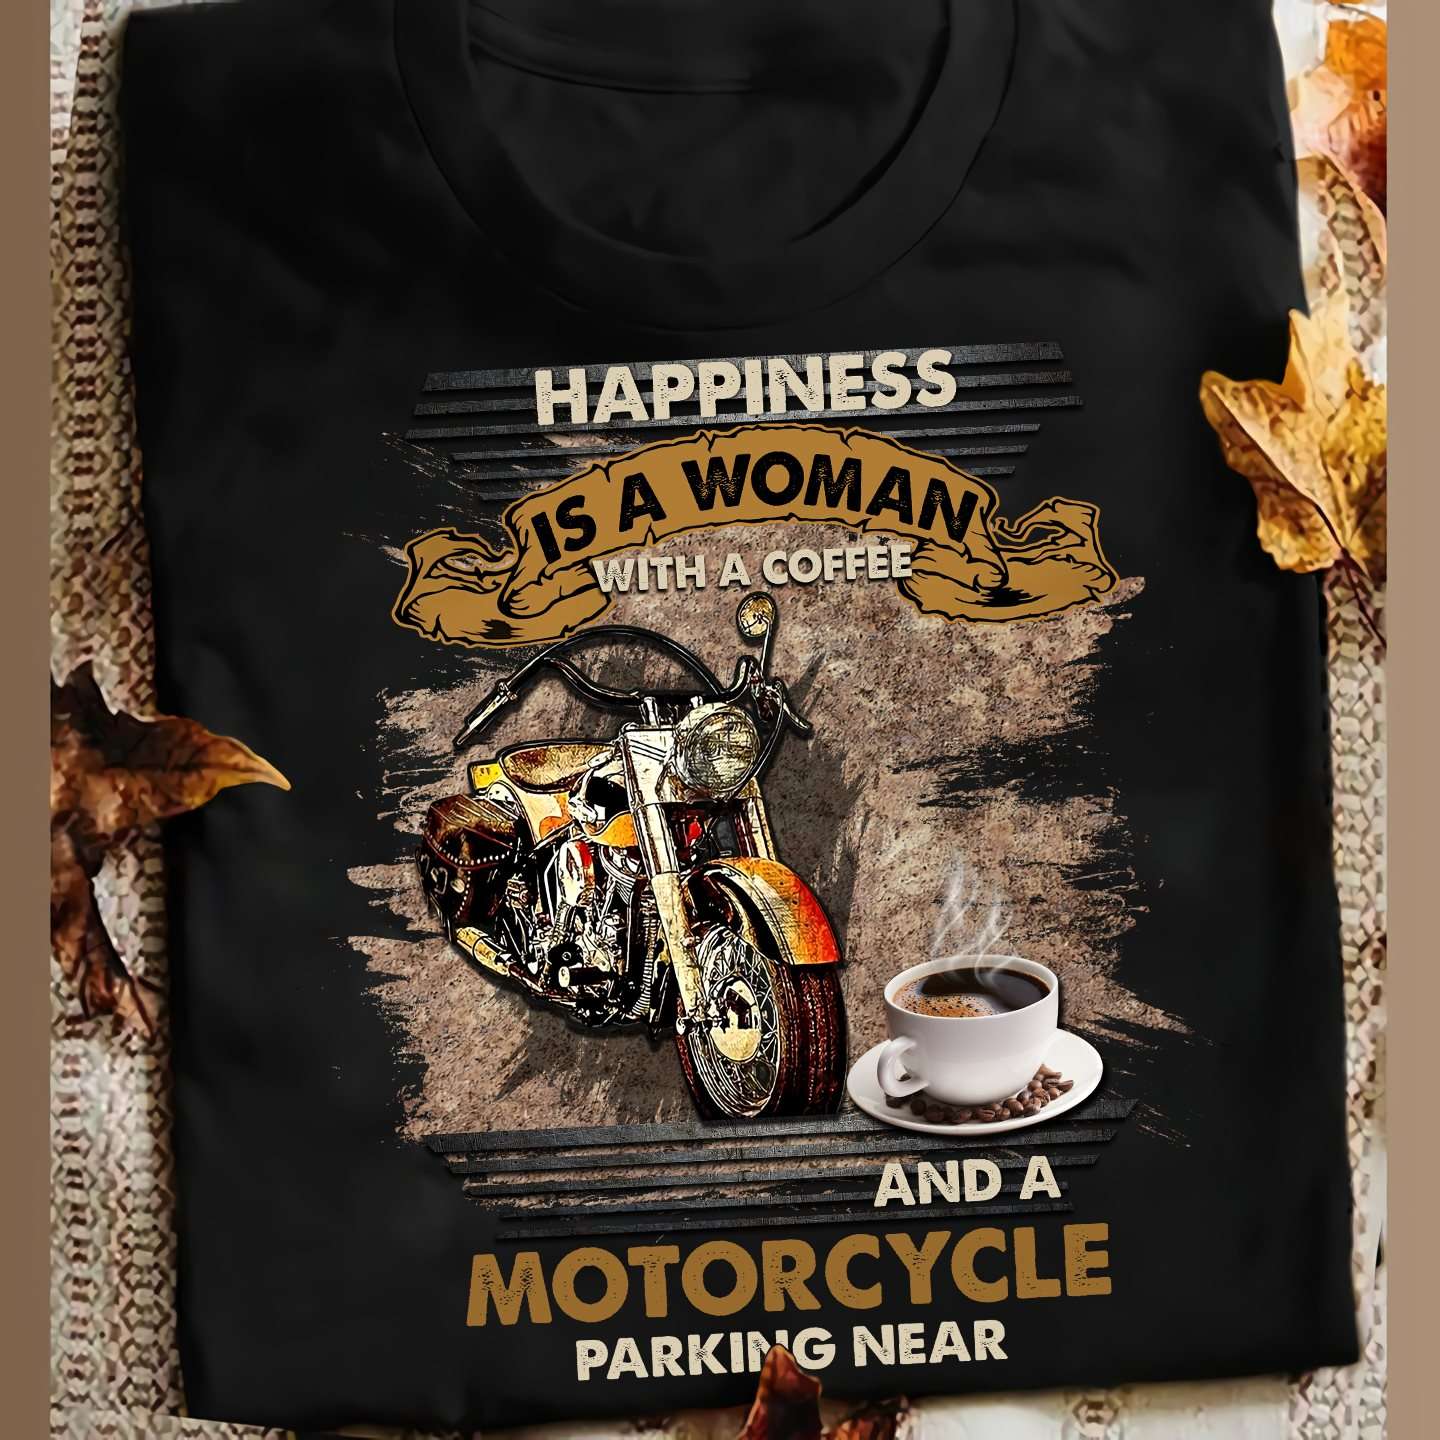 Motorcycles Coffee - Happiness is a woman with a coffee and motorcycle parking near